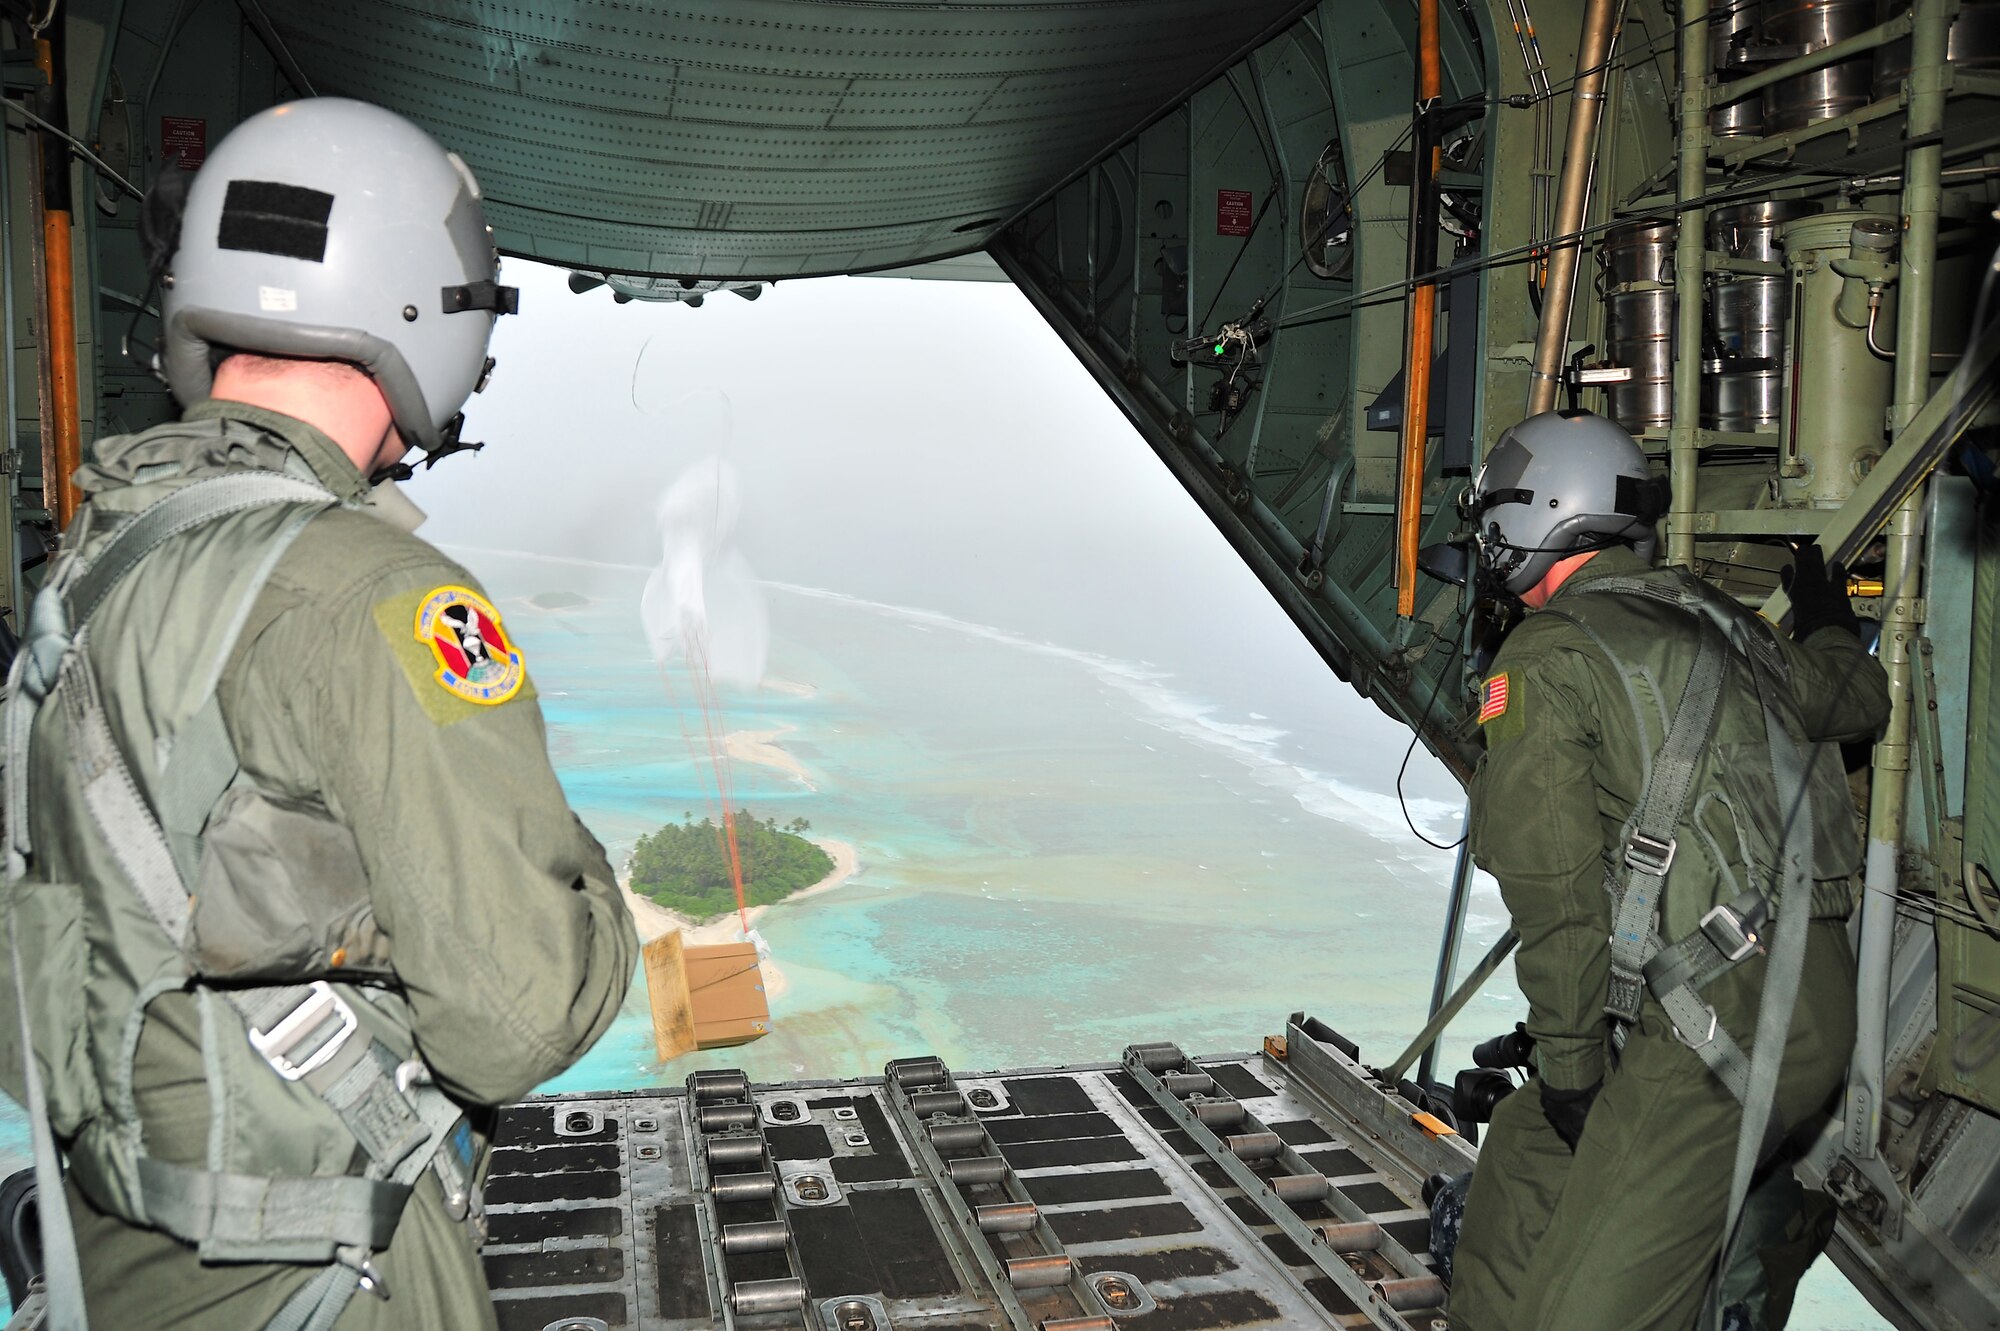 CHUUK, Commonwealth of the Northern Marianas Islands -- Members of the 36th Airlift Squadron watch a bundle of donated goods drop out the back of a C-130 Hercules over a Chuuk island during Operation Christmas Drop Dec. 16. Operation Christmas Drop, the longest running humanitarian airlift mission in the world, delivers supplies to remore islands of the Commonwealth of the Northern Marianas Islands of Yap, Palau, Chuuk and Pohnpei. (U.S. Air Force photo/Tech. Sgt. Kimberly Spinner)